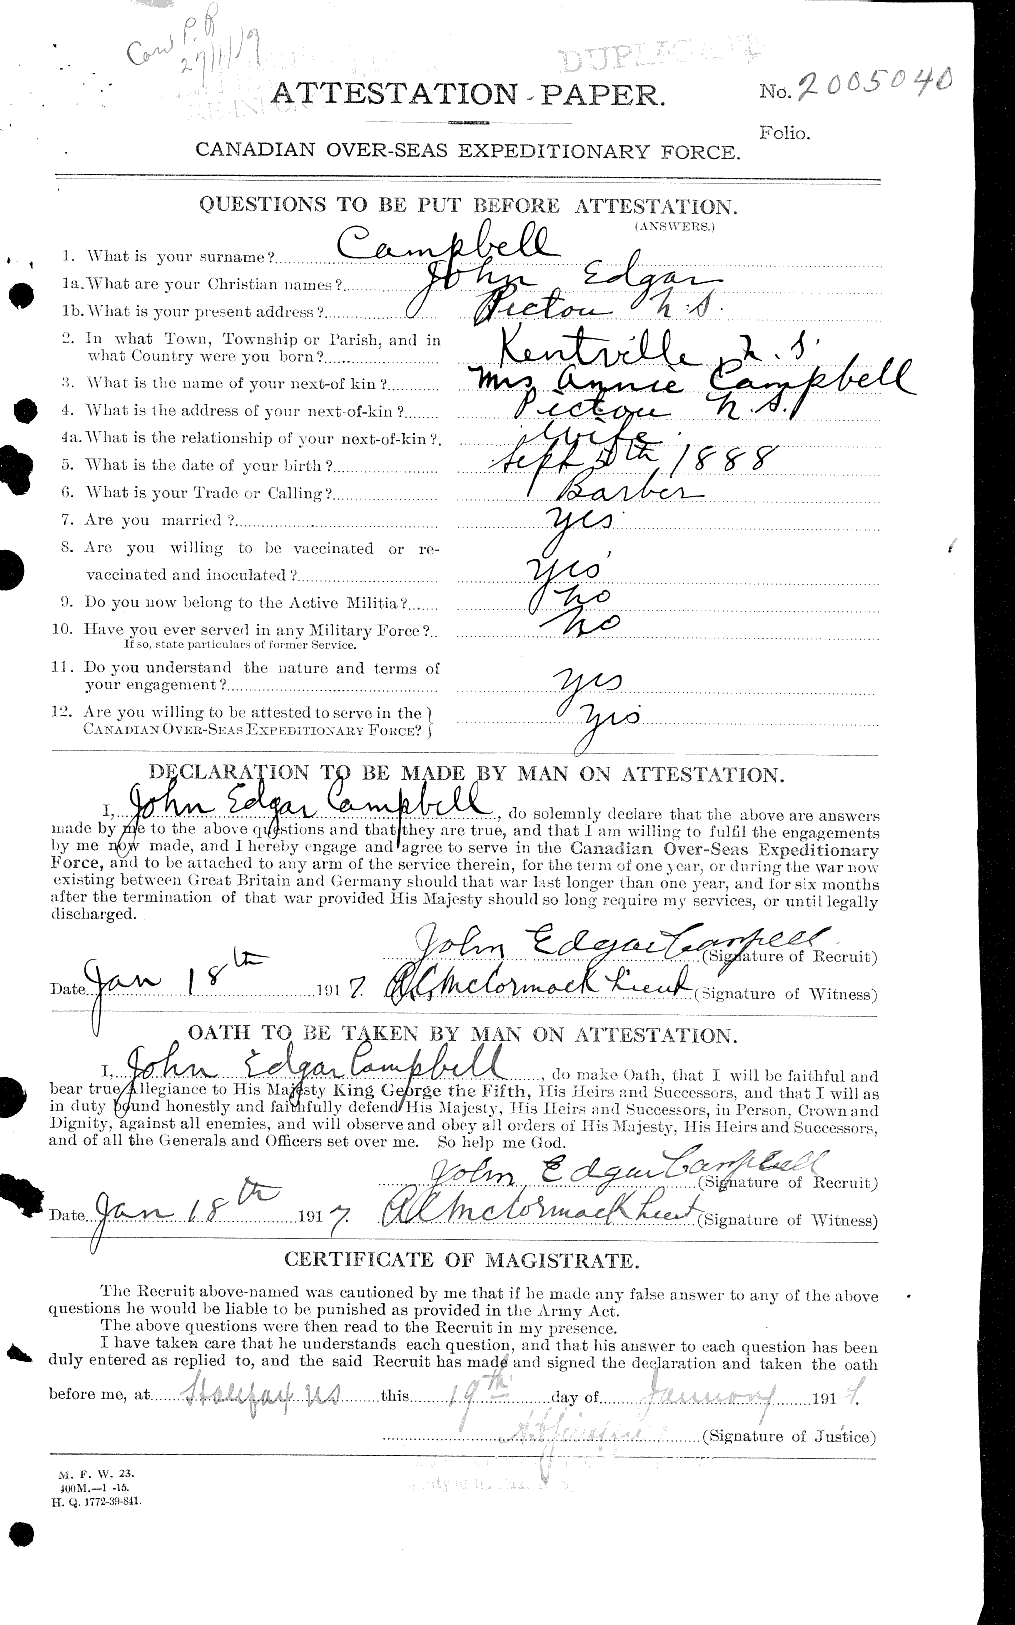 Personnel Records of the First World War - CEF 008509a